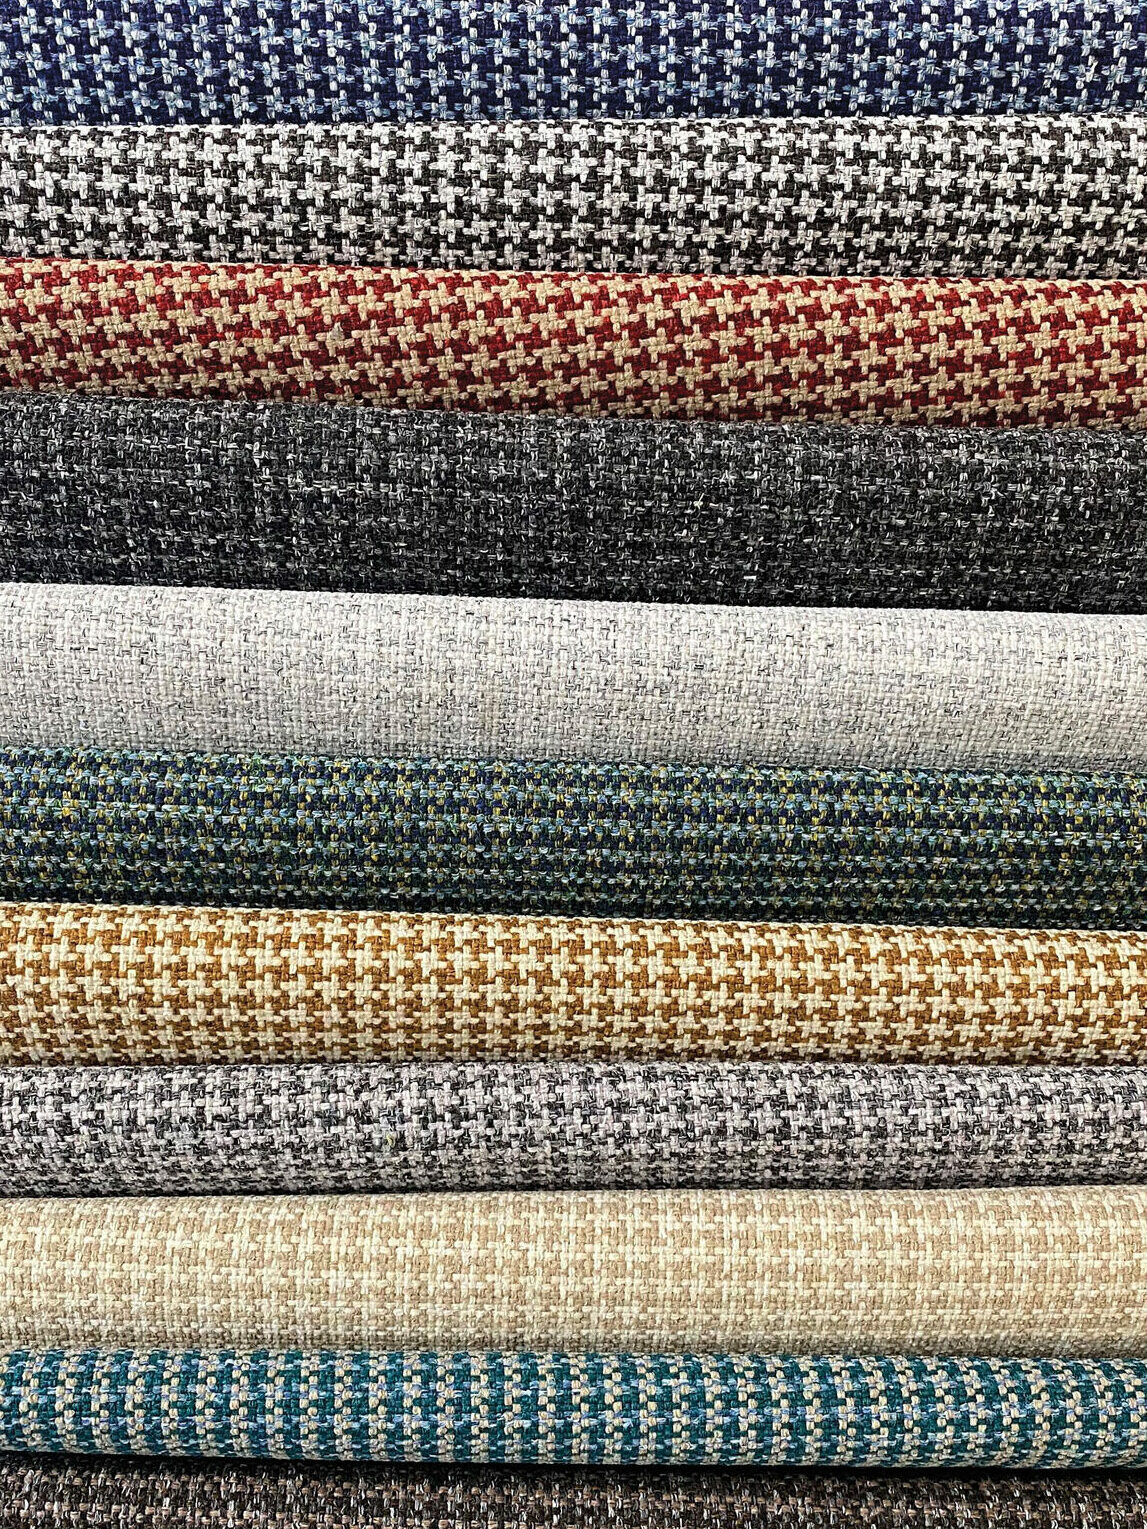 detail photograph of fabric samples